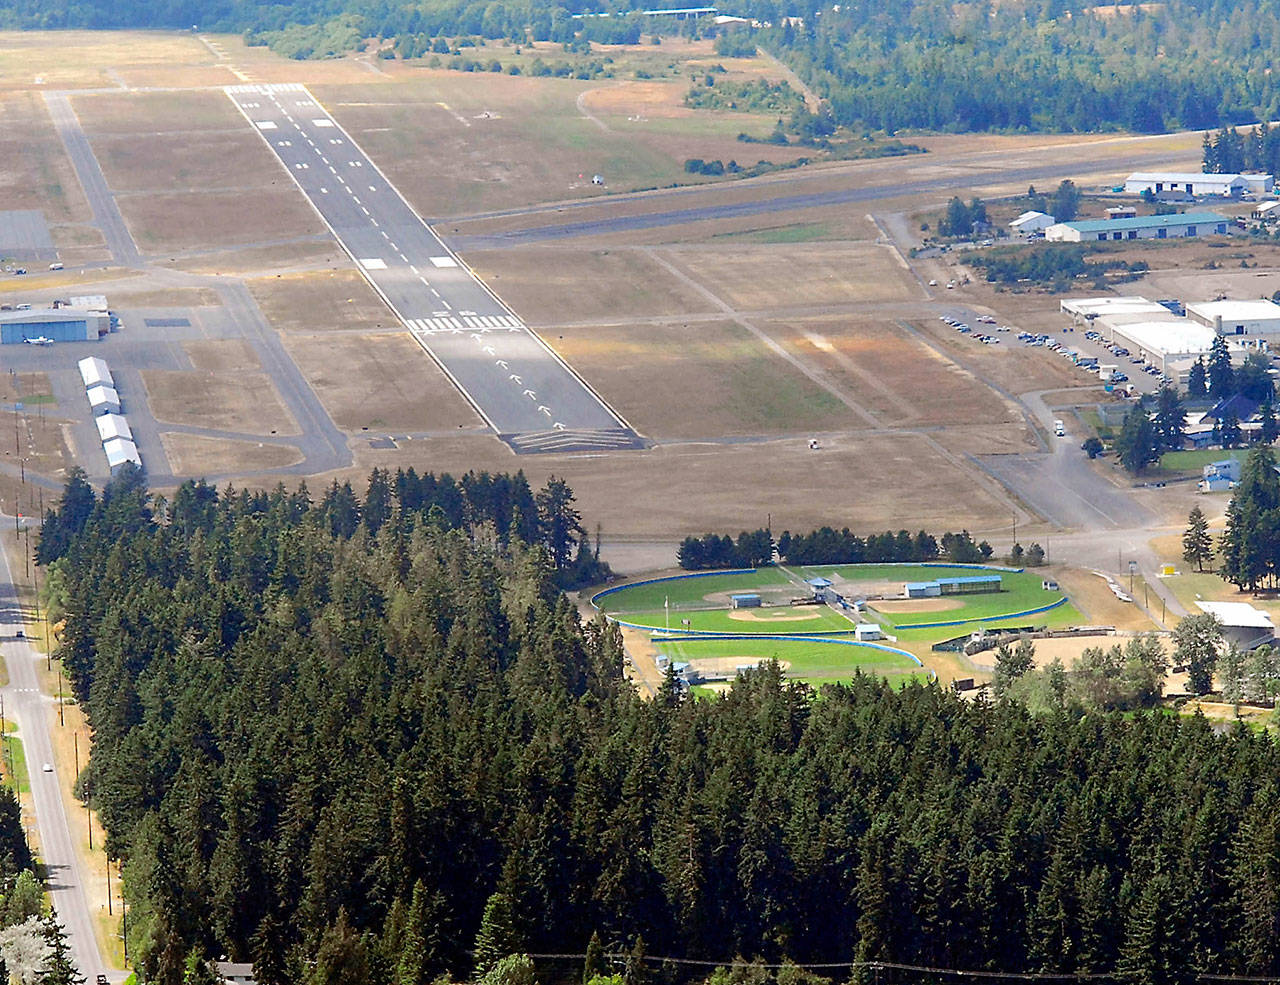 The 6,347-foot long main runway at William R. Fairchild International Airport in Port Angeles, known officially as 08/26, is shown in this July 2011 file photo. The heavily forested Lincoln Park with its athletic fields is shown at bottom. (Keith Thorpe/Peninsula Daily News)